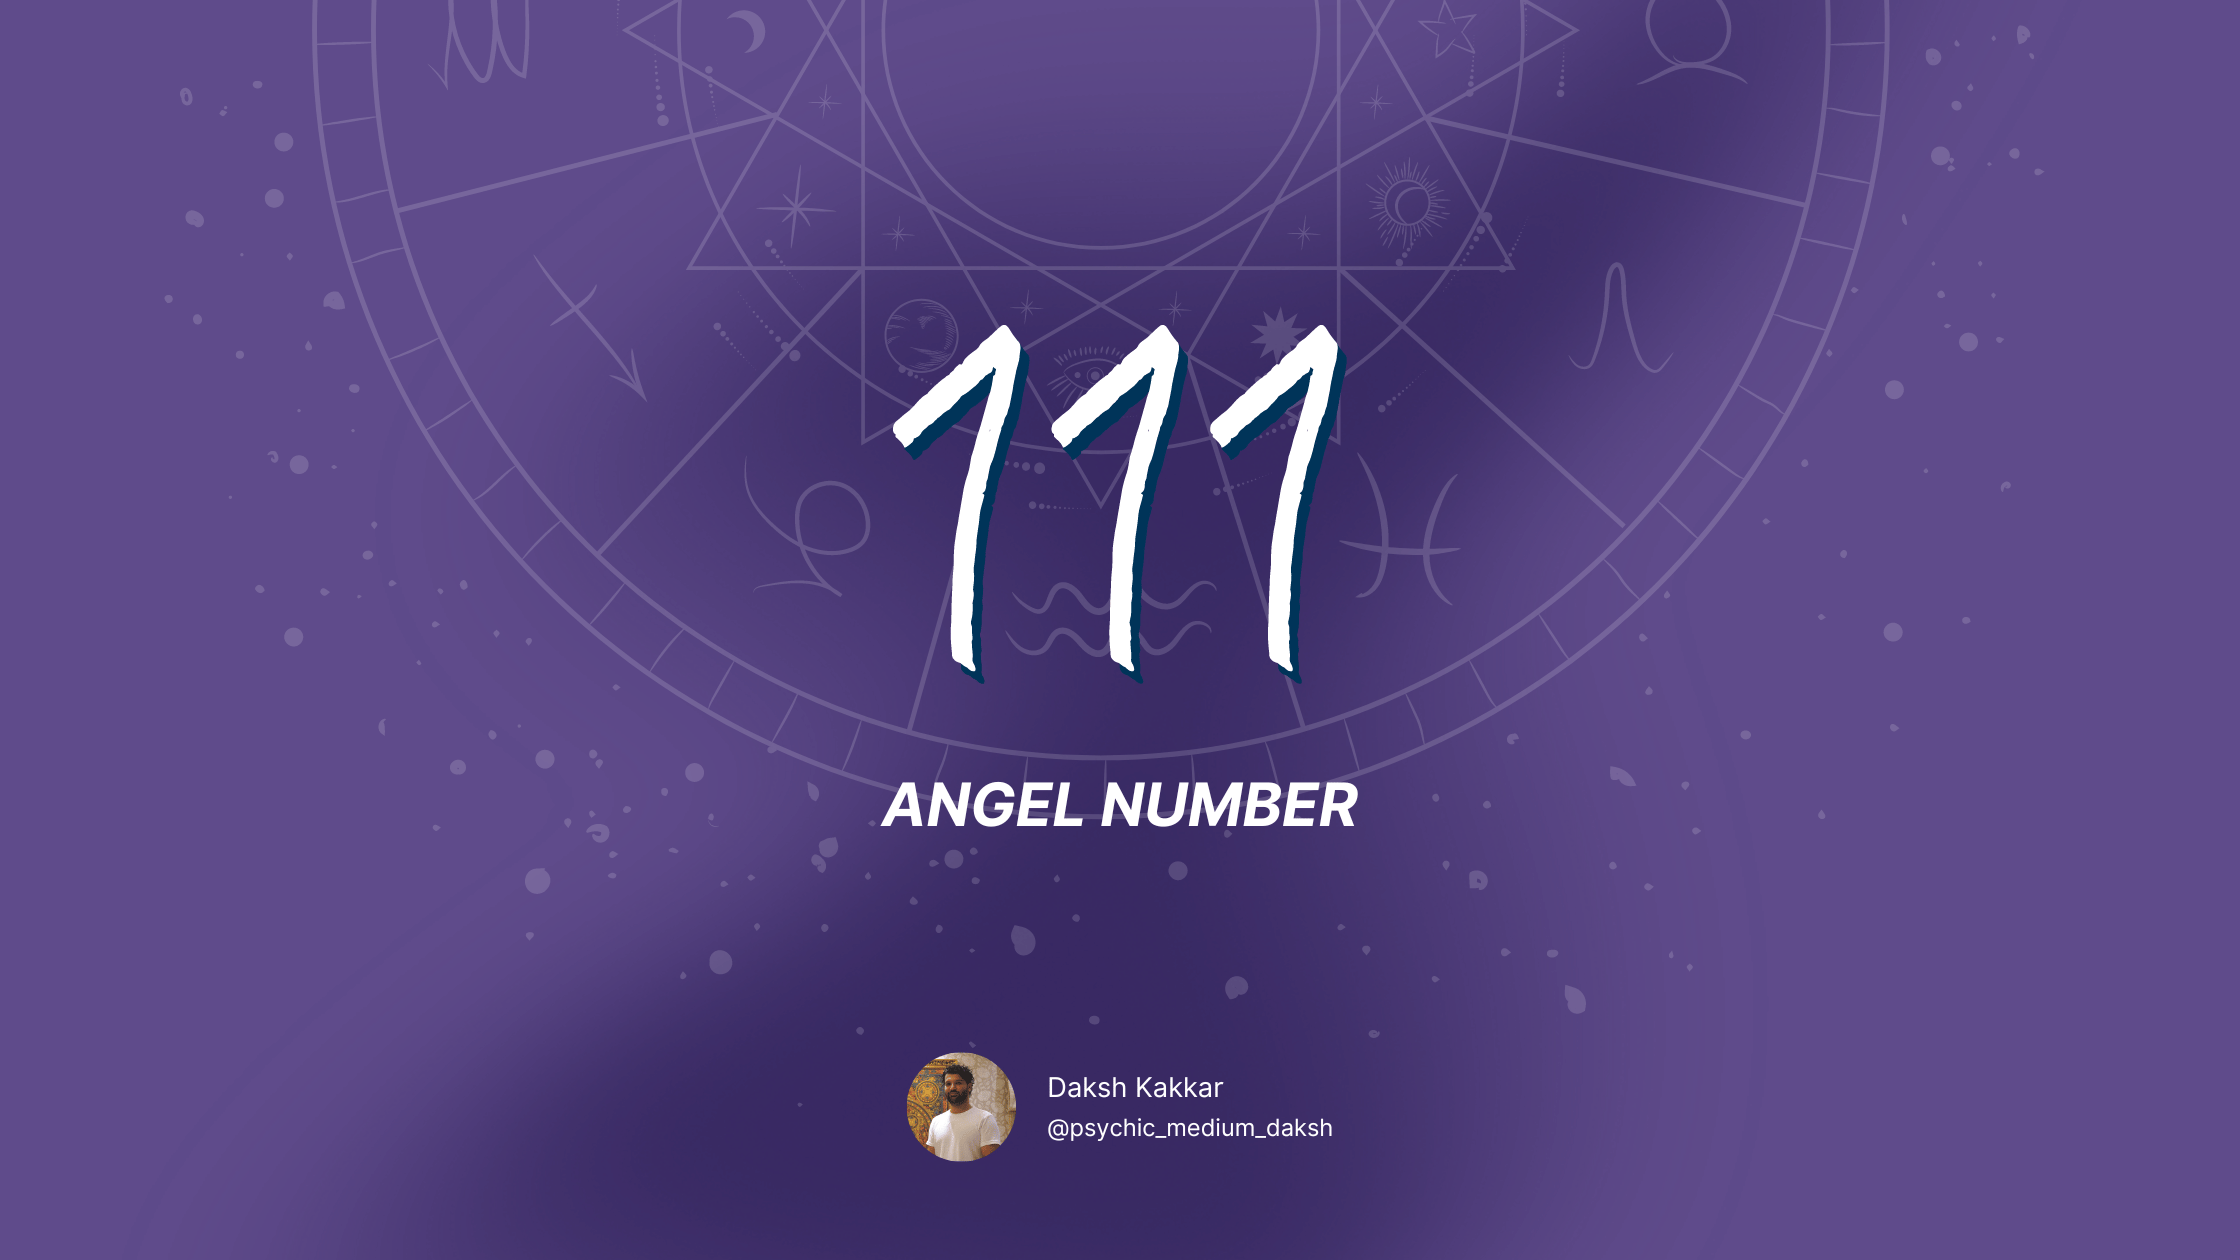 111 Angel Number Meaning in Hindi